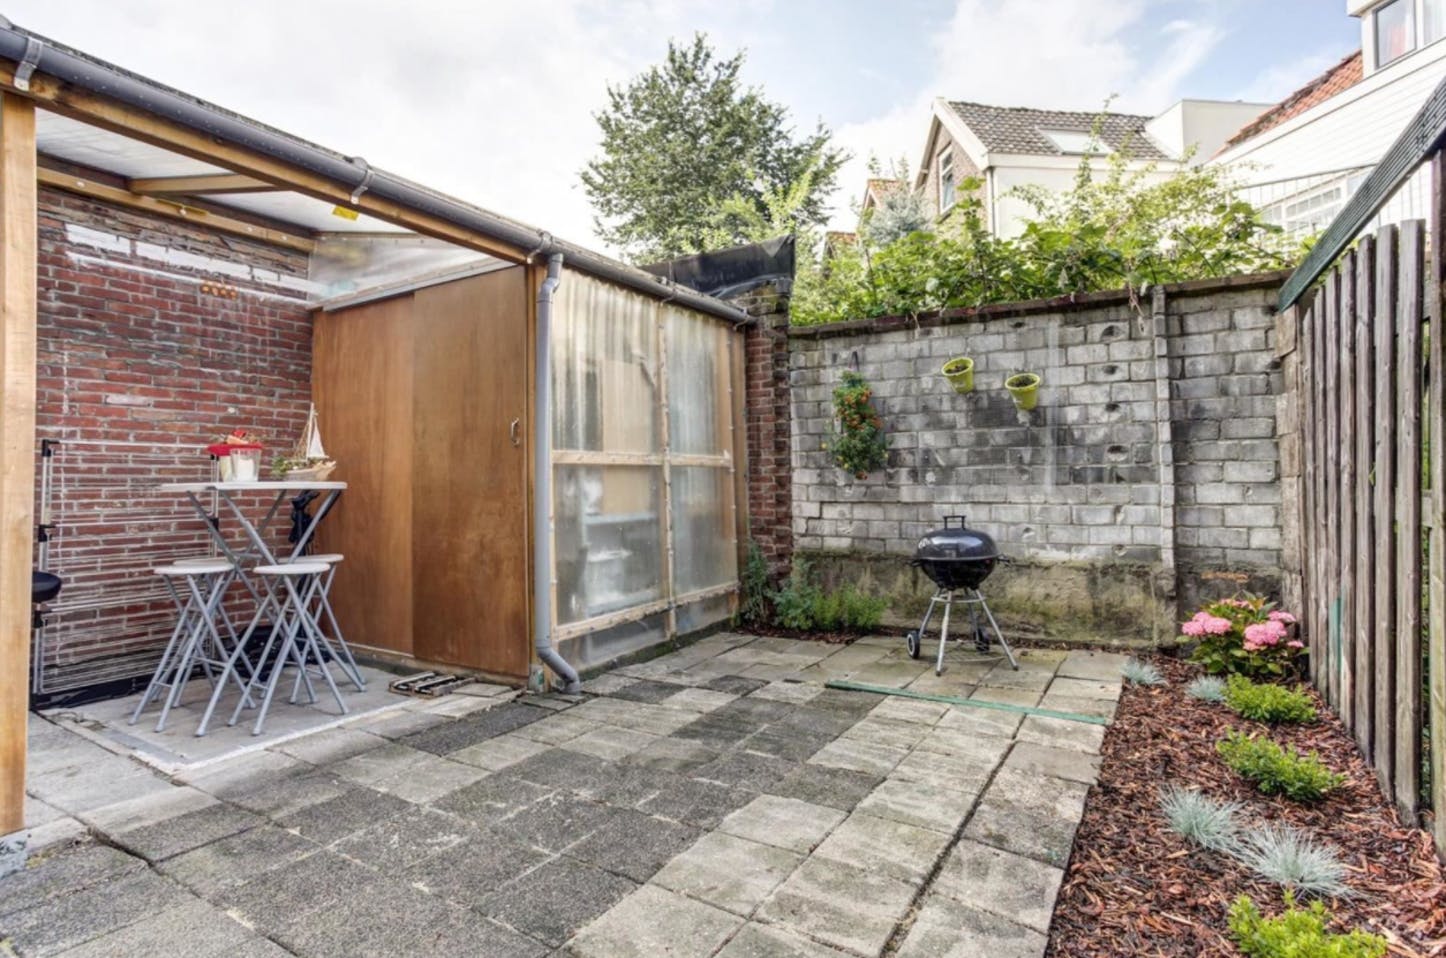 Strevels - House for expats in Rotterdam